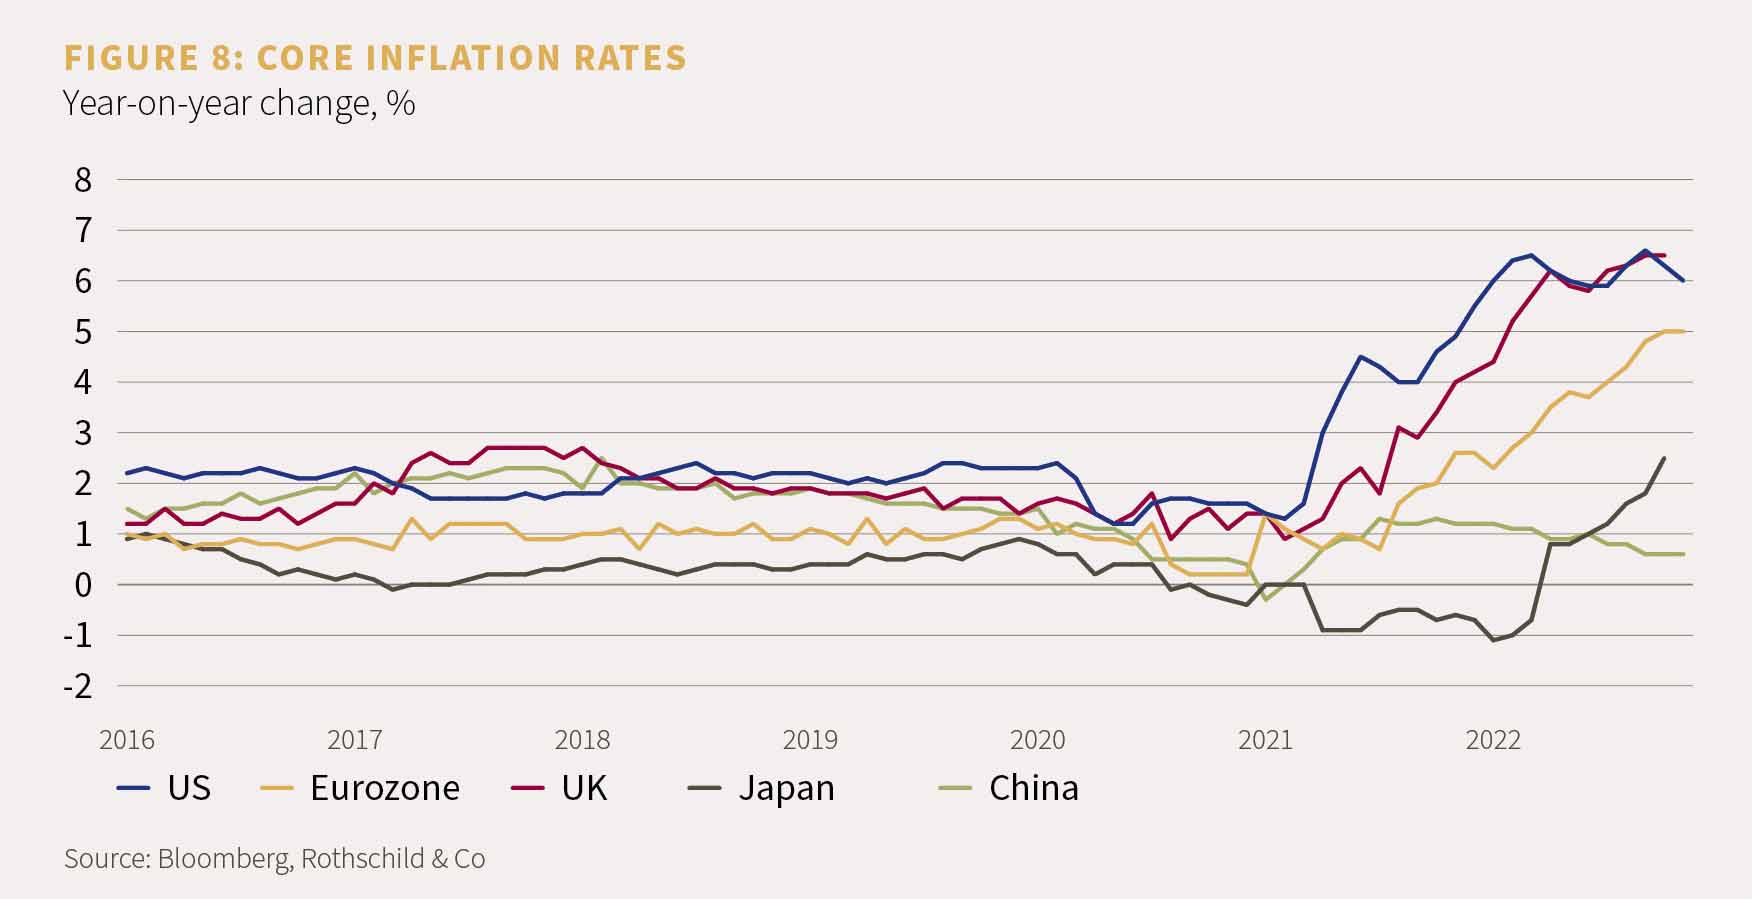 Chart showing core inflation rates